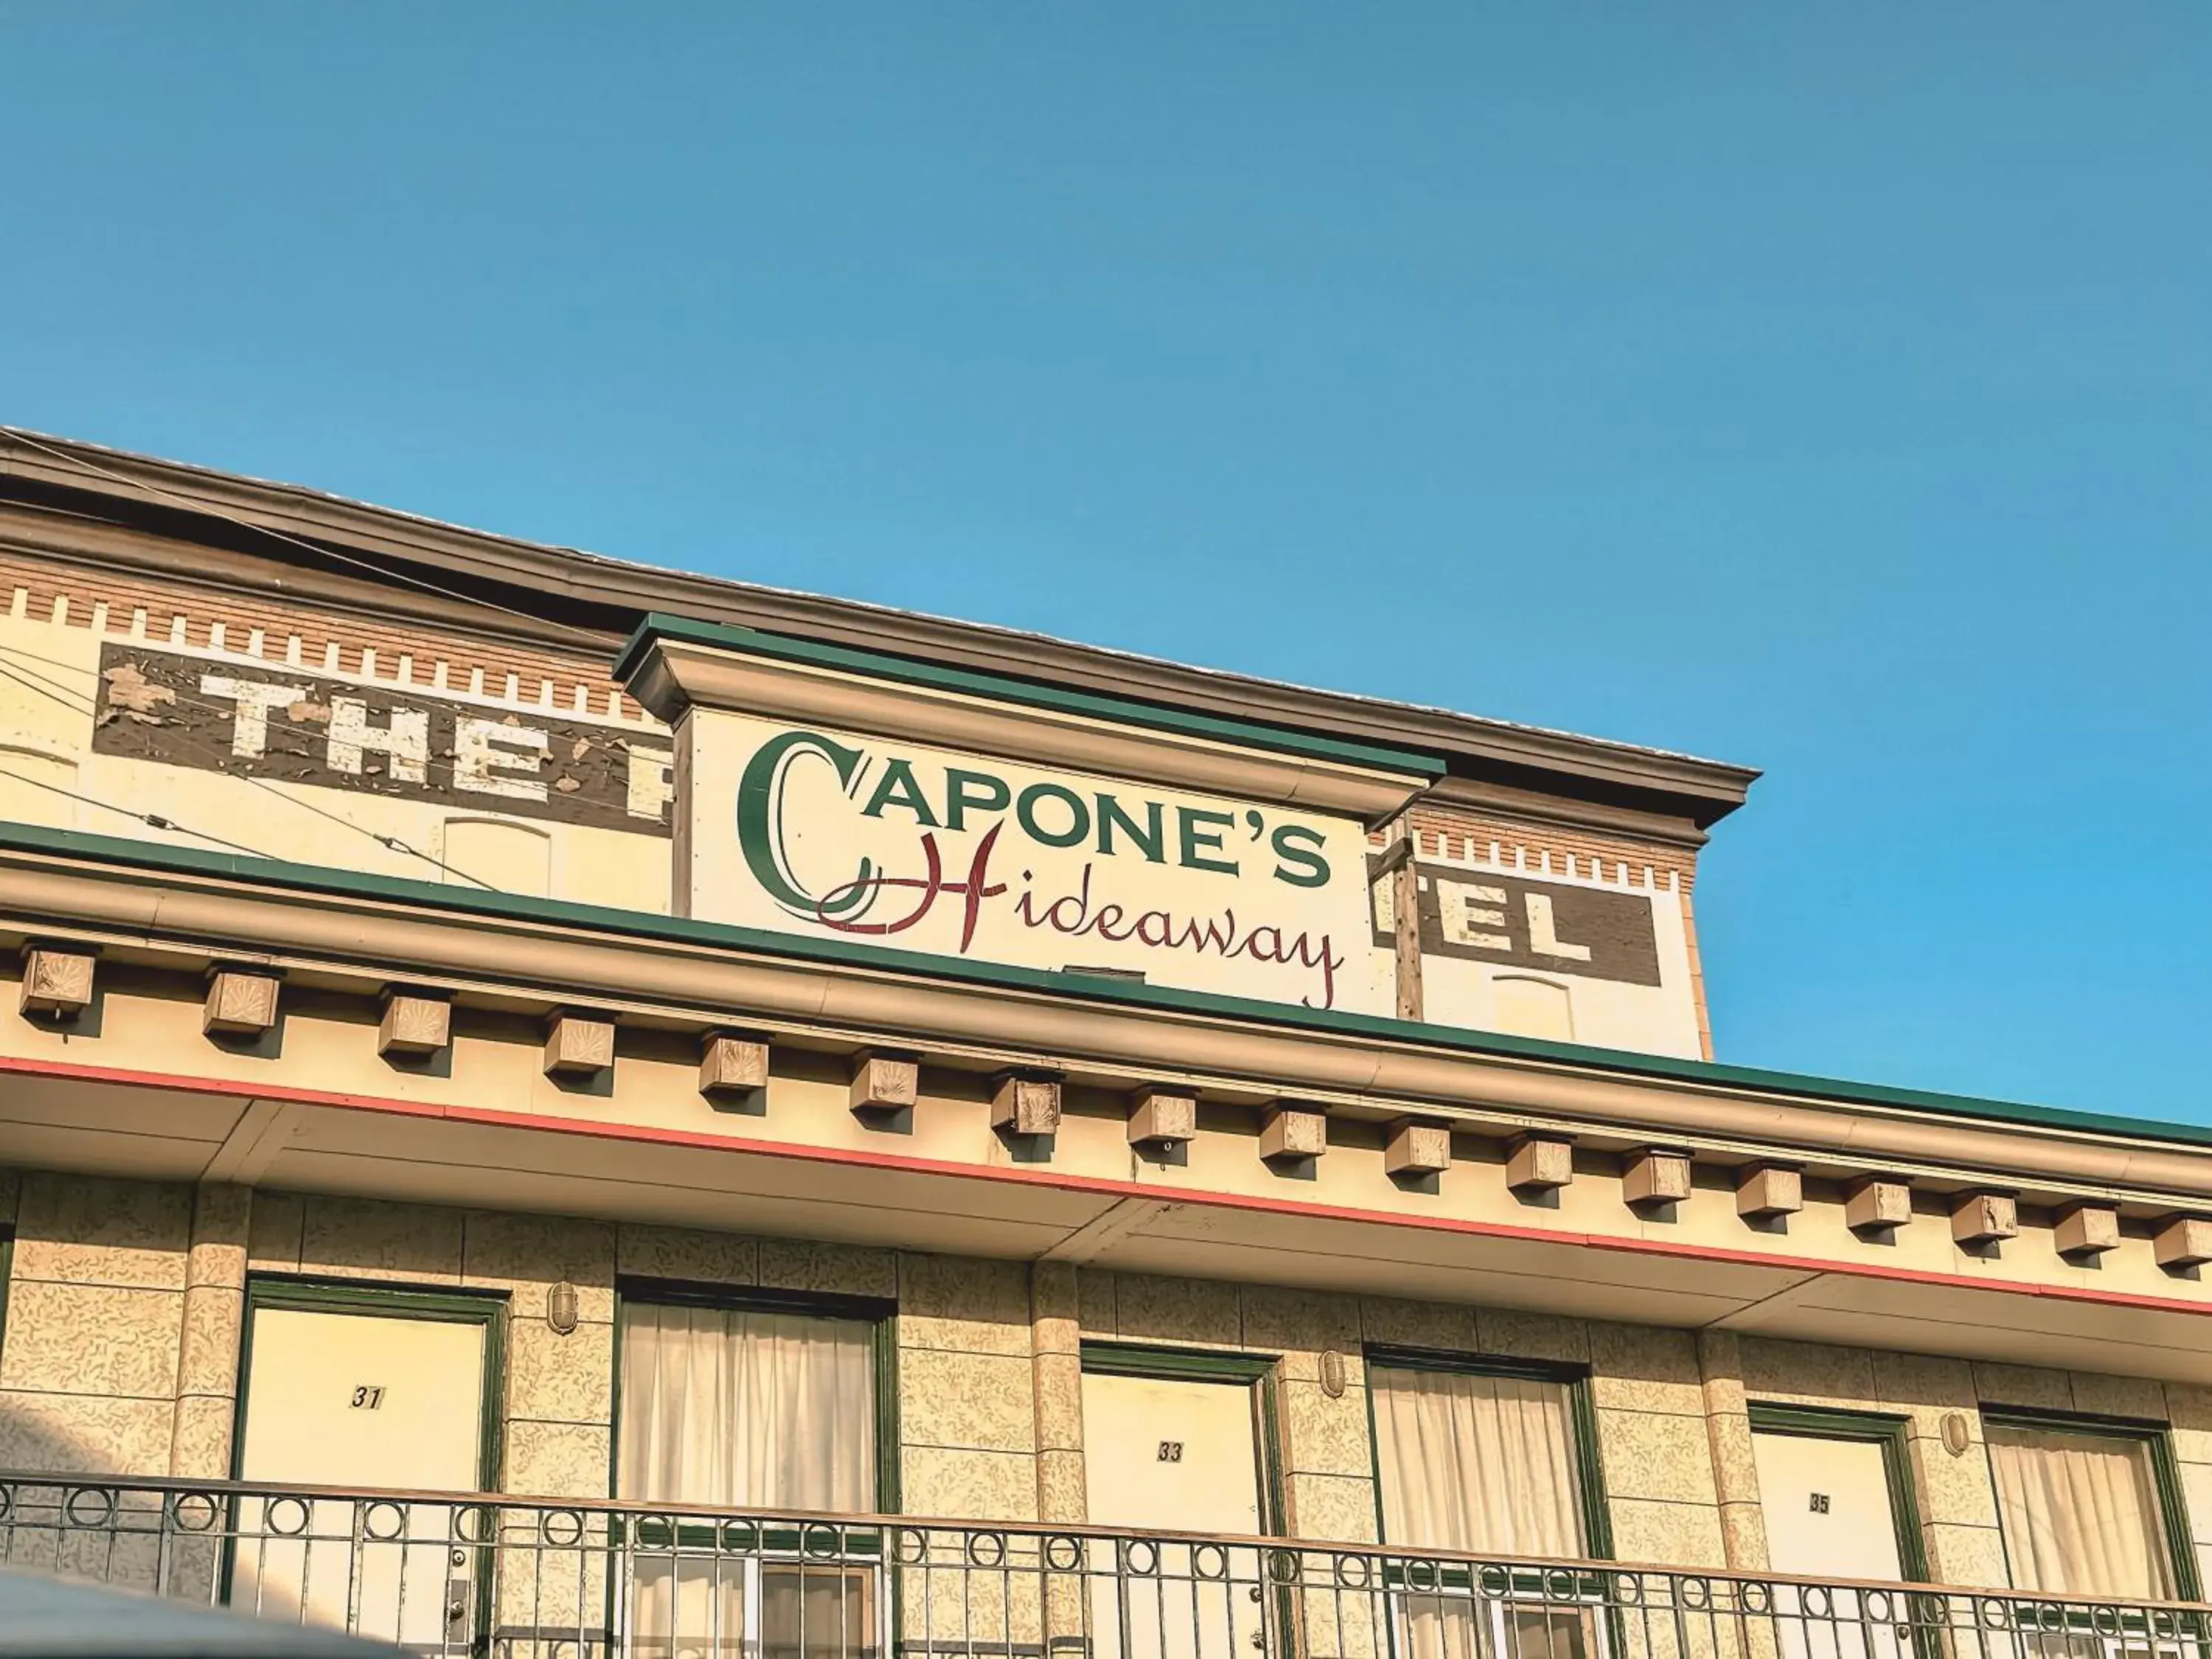 Property Building in Capone's Hideaway Motel